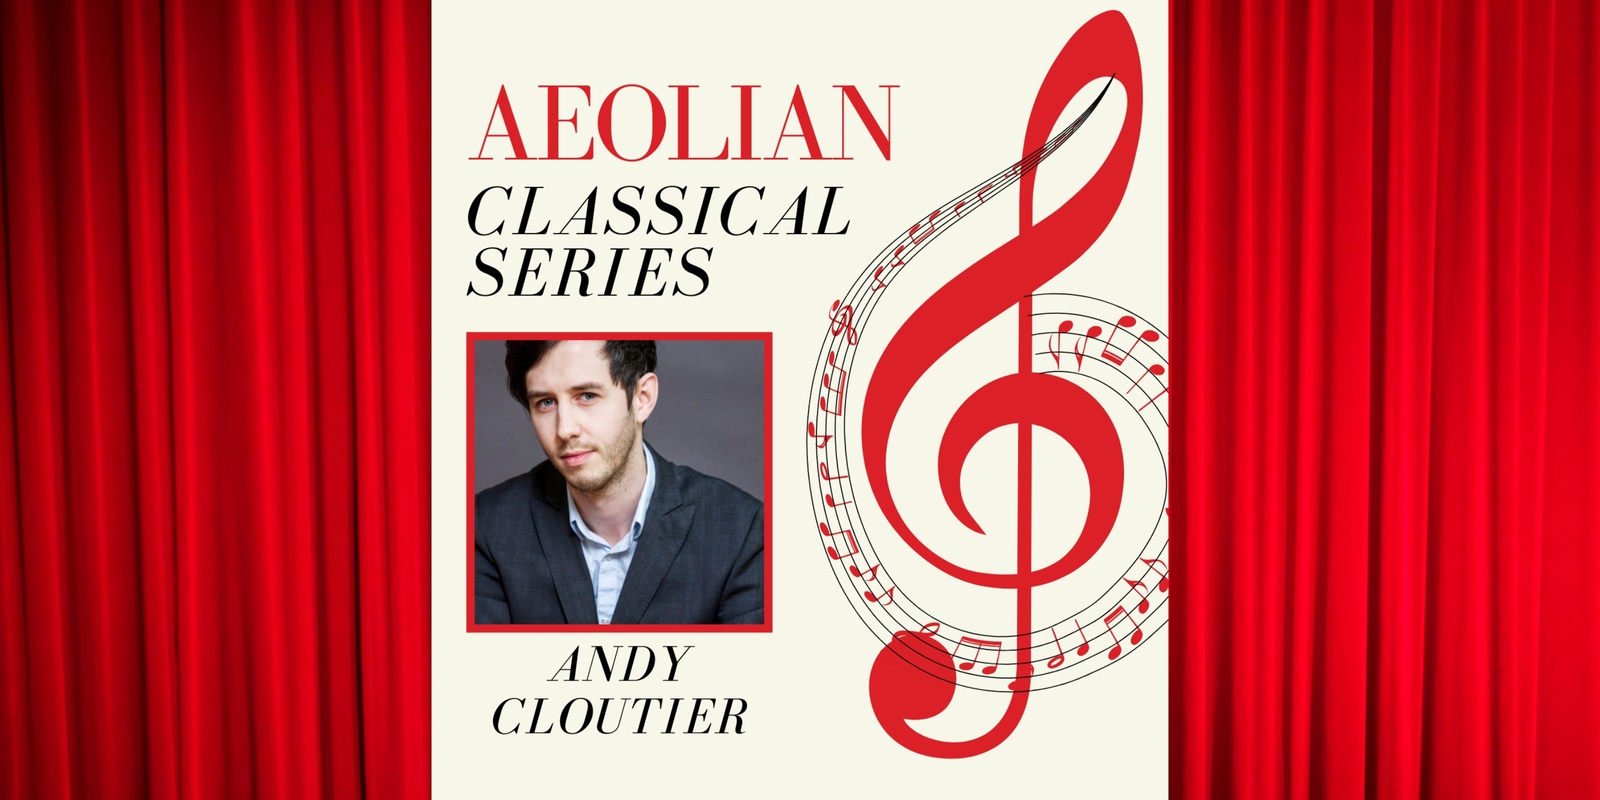 Banner image for Aeolian Classical Series - Andy Cloutier